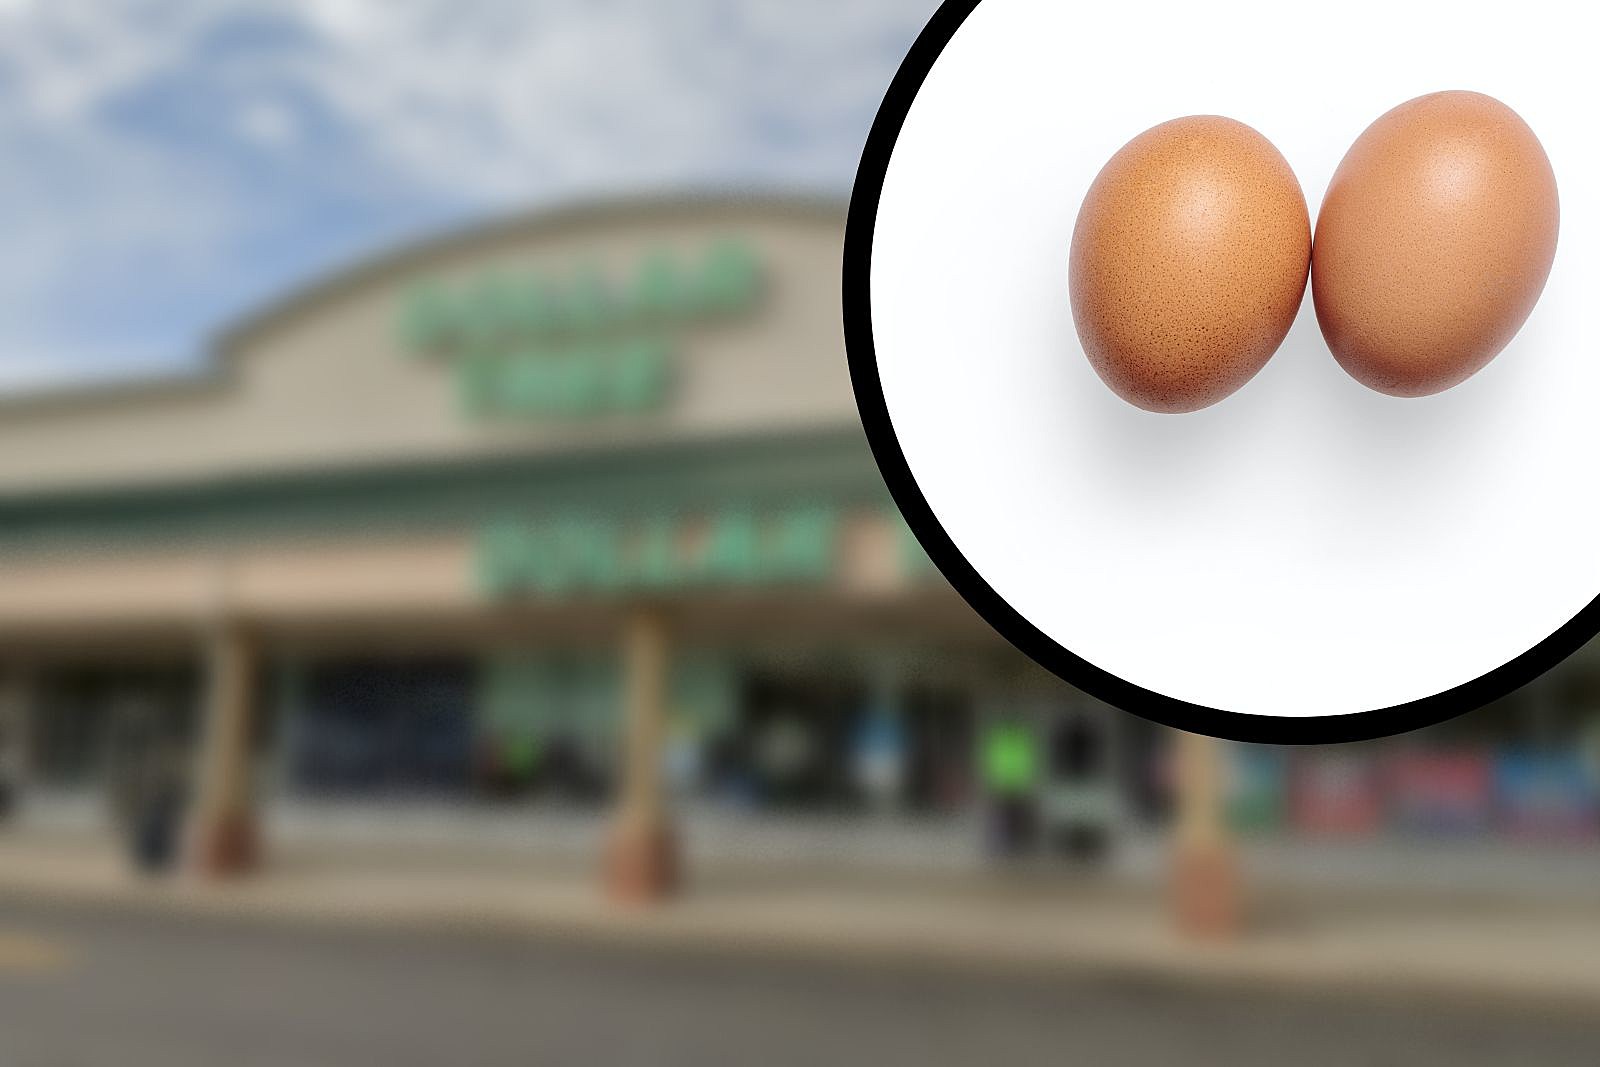 Dollar Tree Announced It Will Stop Selling Eggs